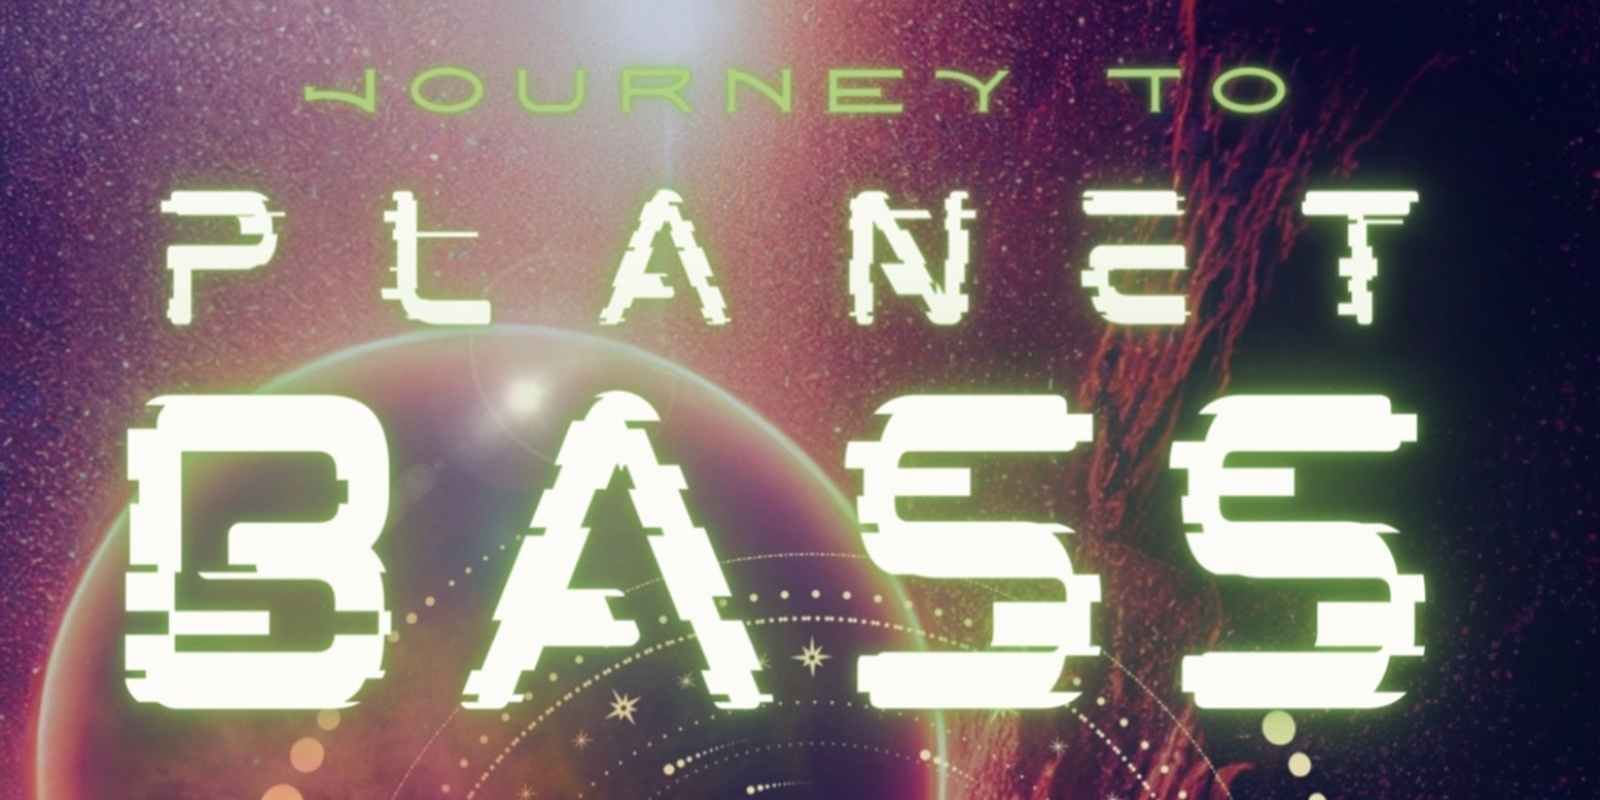 Banner image for Journey to Planet Bass Part 2